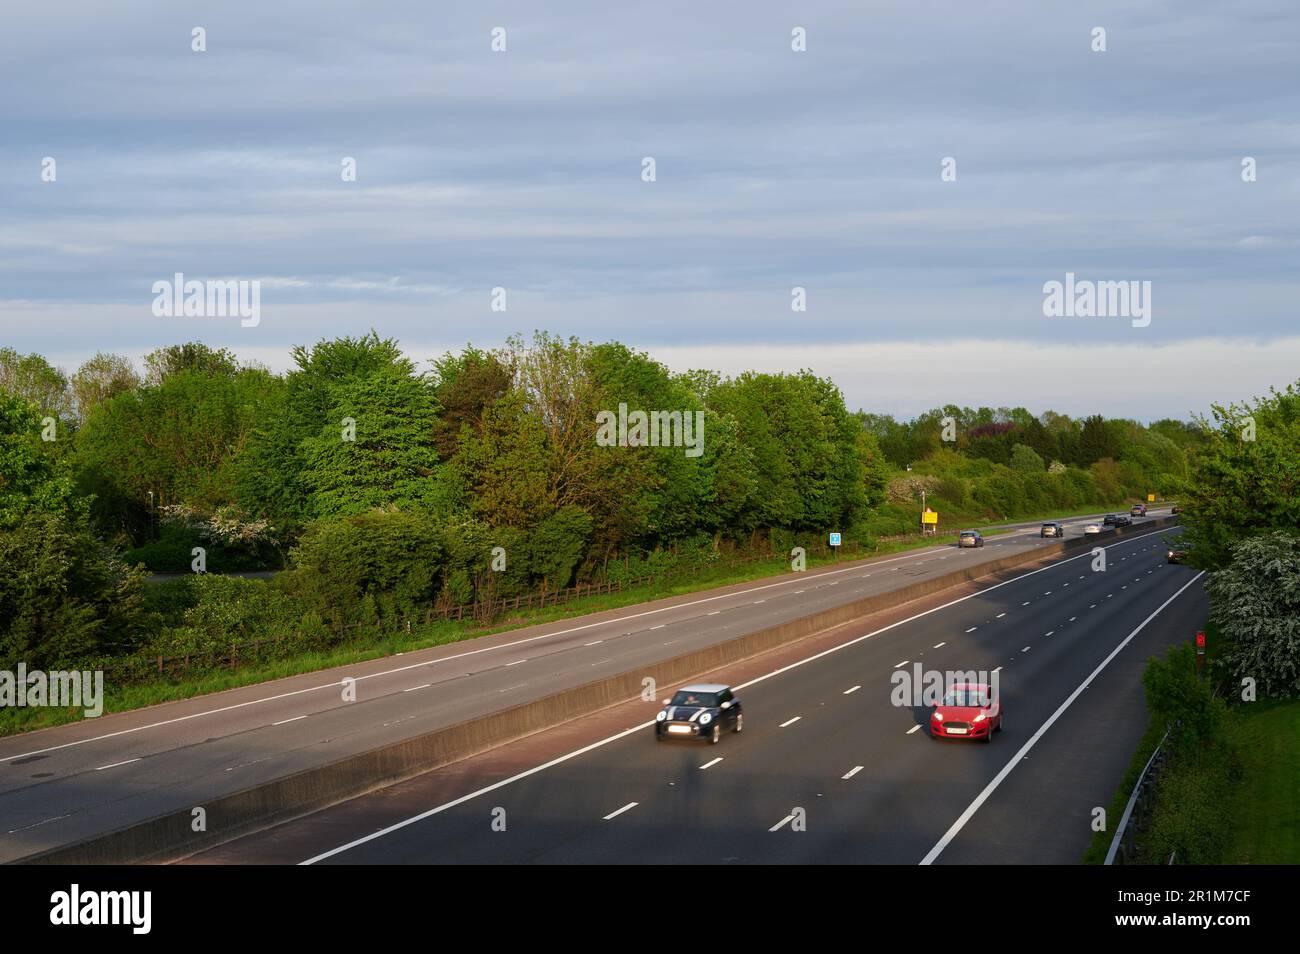 overhead image of three lane motorway in daylight with motion blur of traffic Stock Photo